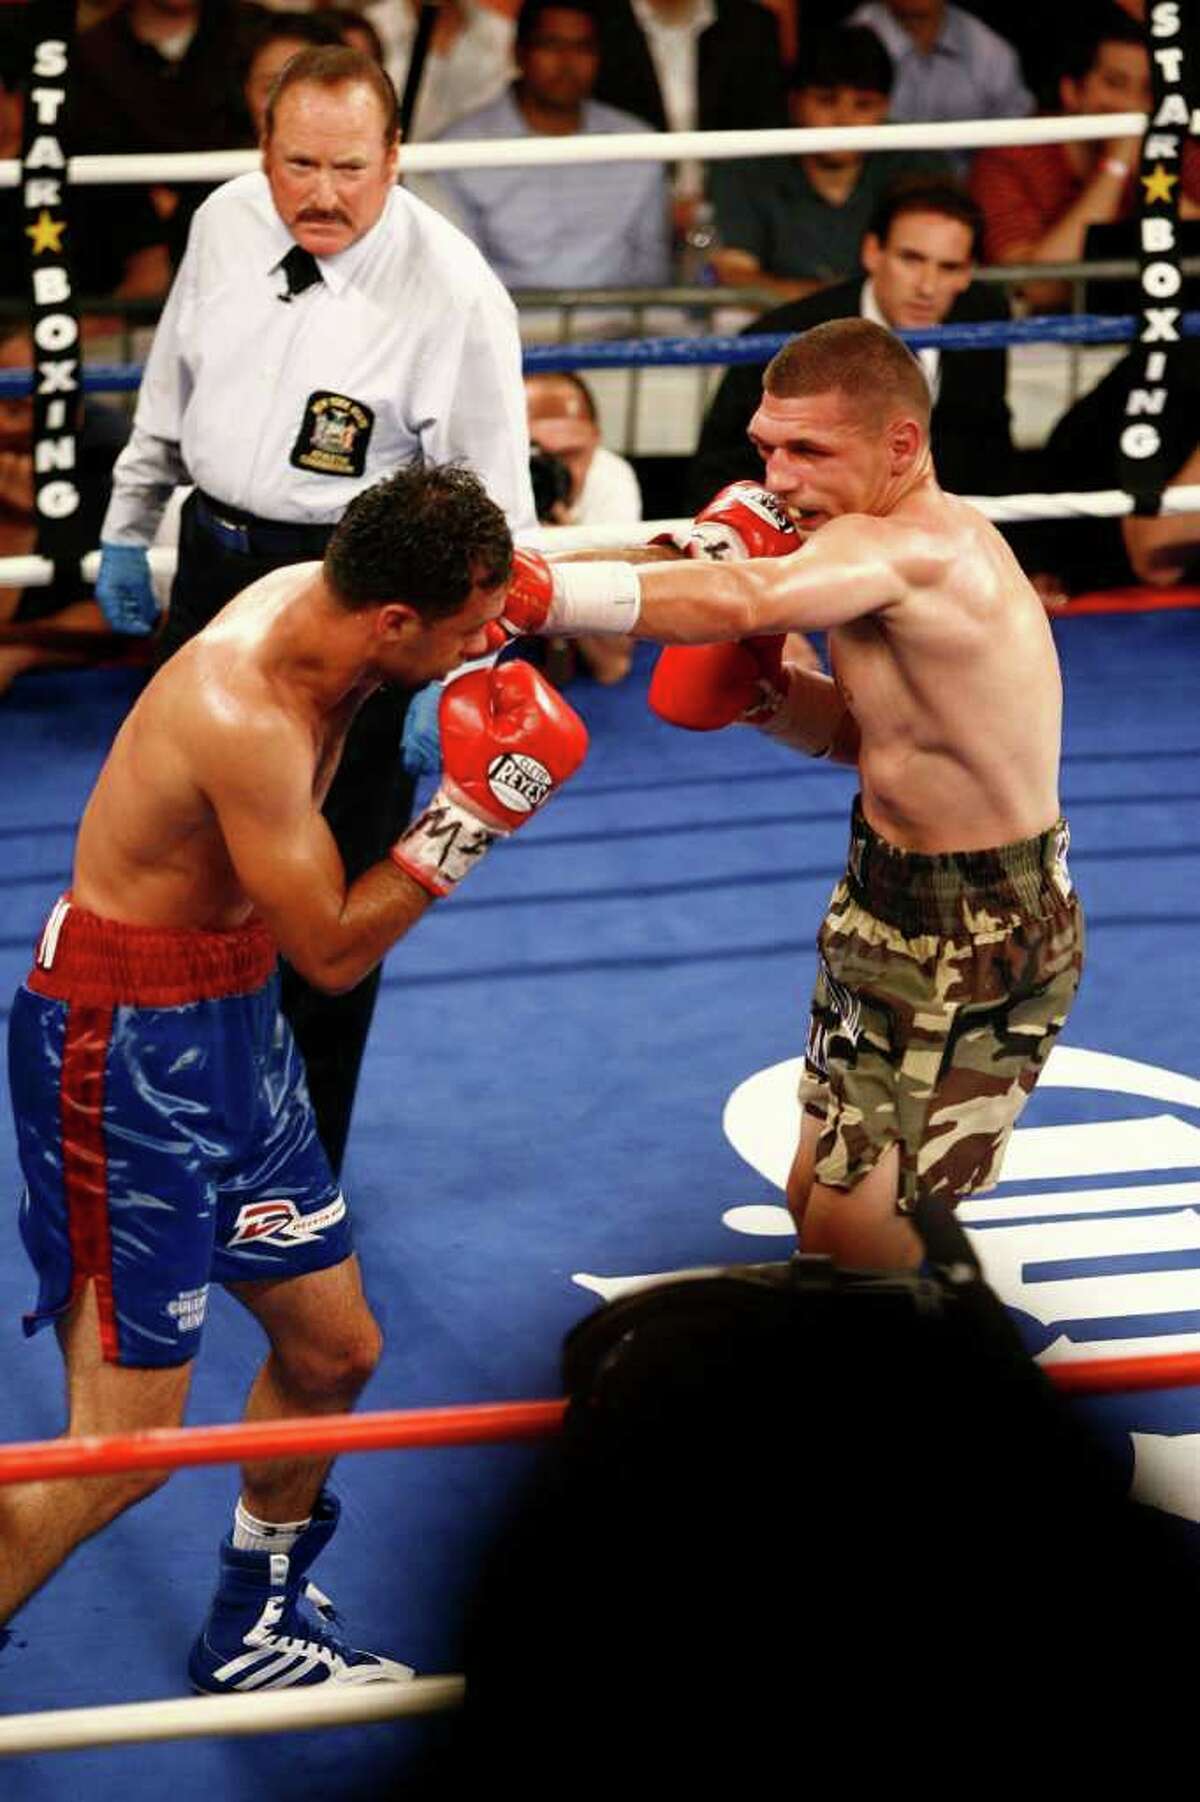 Delvin Rodriguez, of Danbury, in blue/red trunks, fights Pawel Wolak, of New Jersey, in camouflage trunks,during their Junior Middleweight Championship at the Roseland Ballroom in New York City on Friday, July 15, 2011.